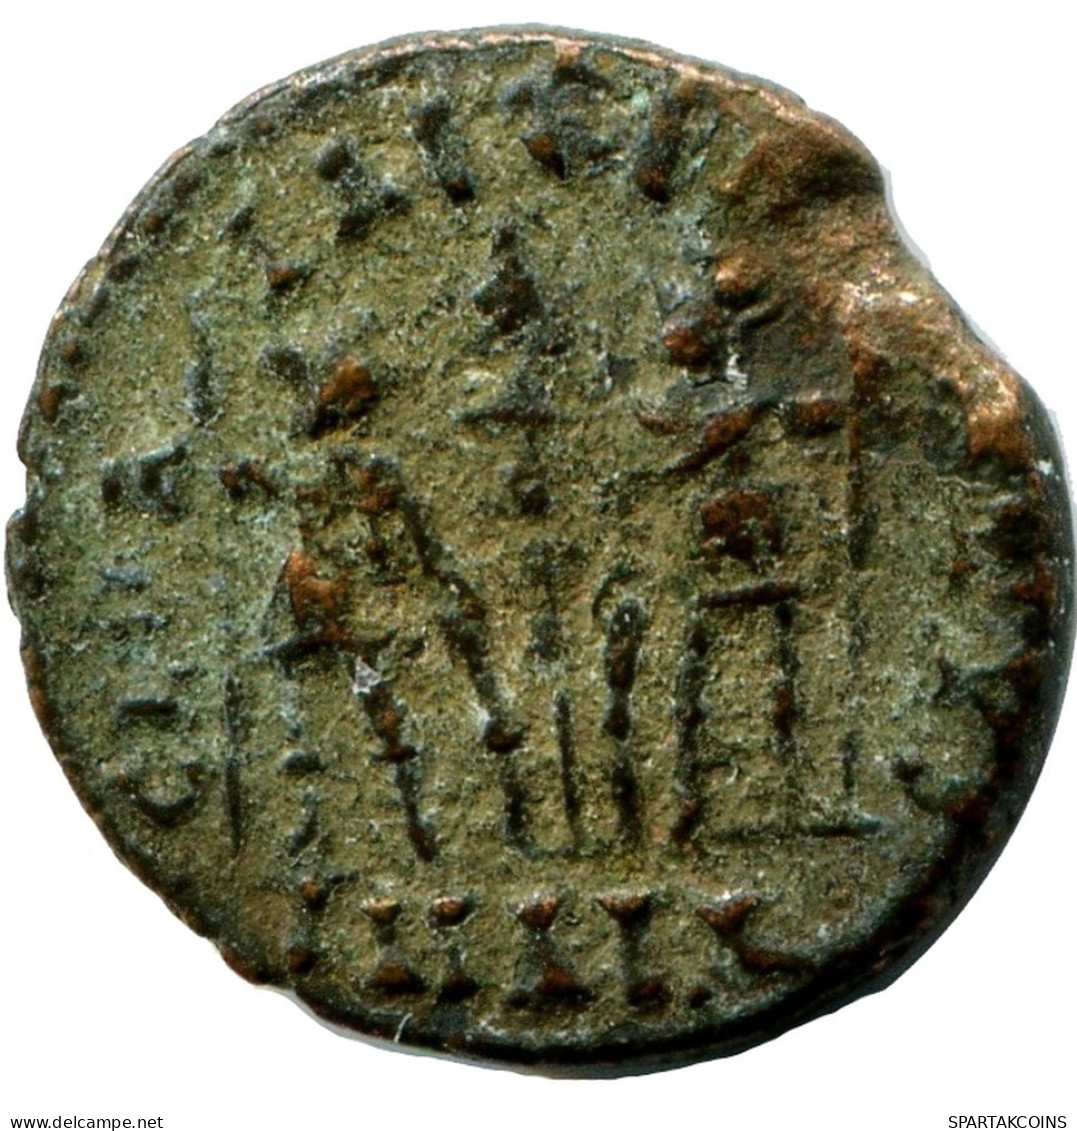 CONSTANS MINTED IN ALEKSANDRIA FOUND IN IHNASYAH HOARD EGYPT #ANC11470.14.D.A - The Christian Empire (307 AD Tot 363 AD)